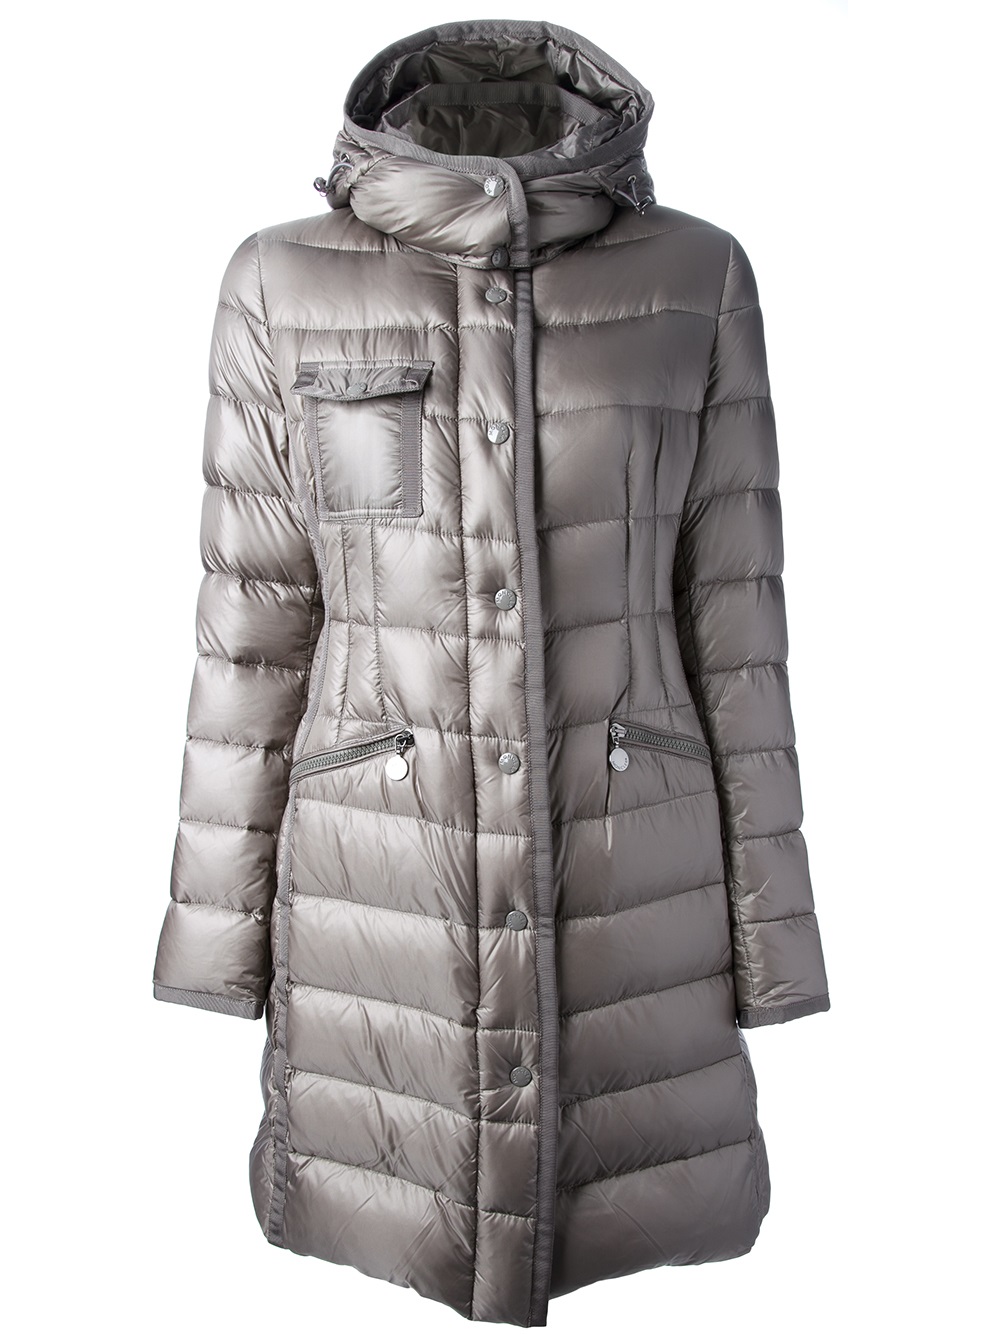 Lyst - Moncler Hermine Feather Down Coat in Gray